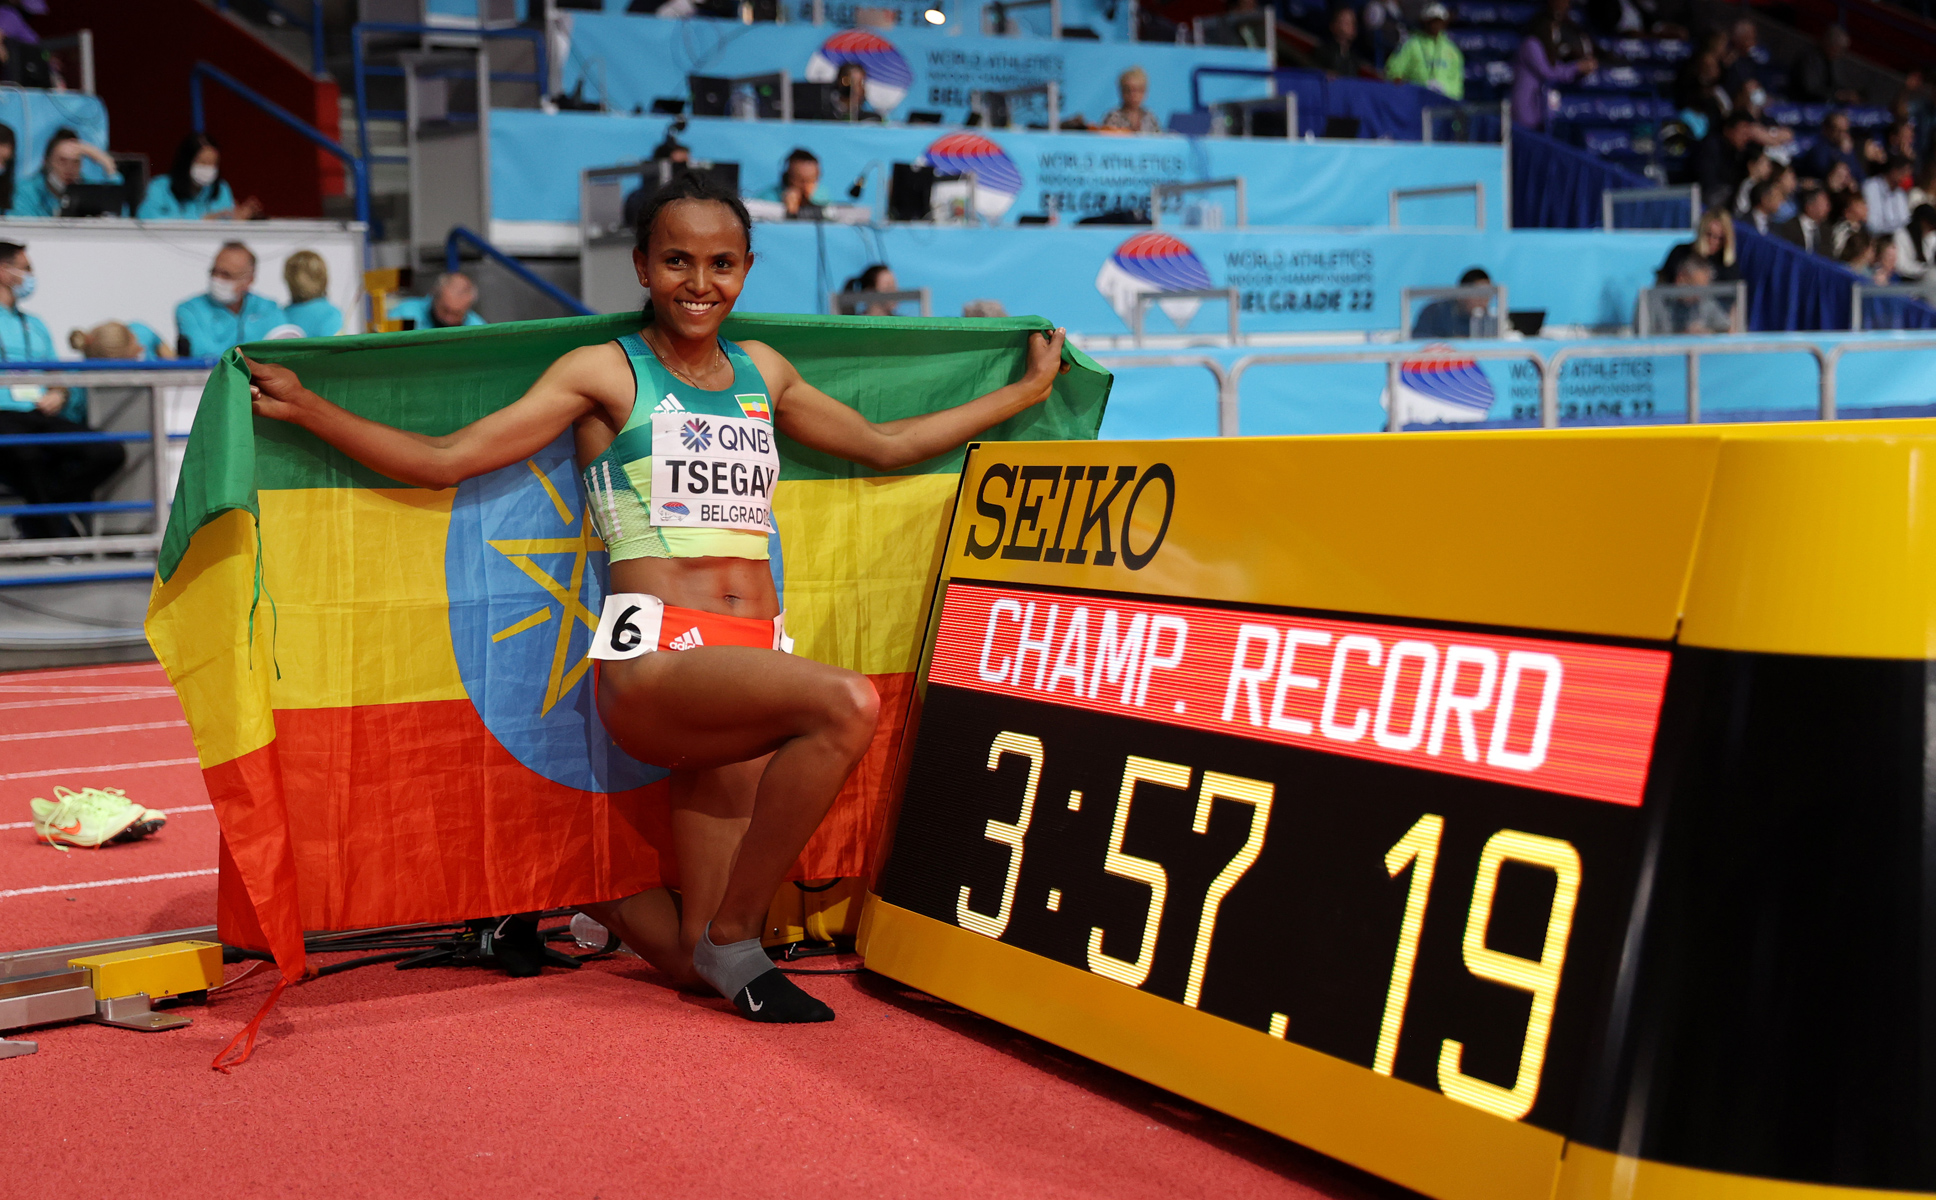 Ethiopian Guday Tsegay smashed the Championships Record to win the women's 1500m in Belgrade 22 / Credit: Getty Images for World Athletics